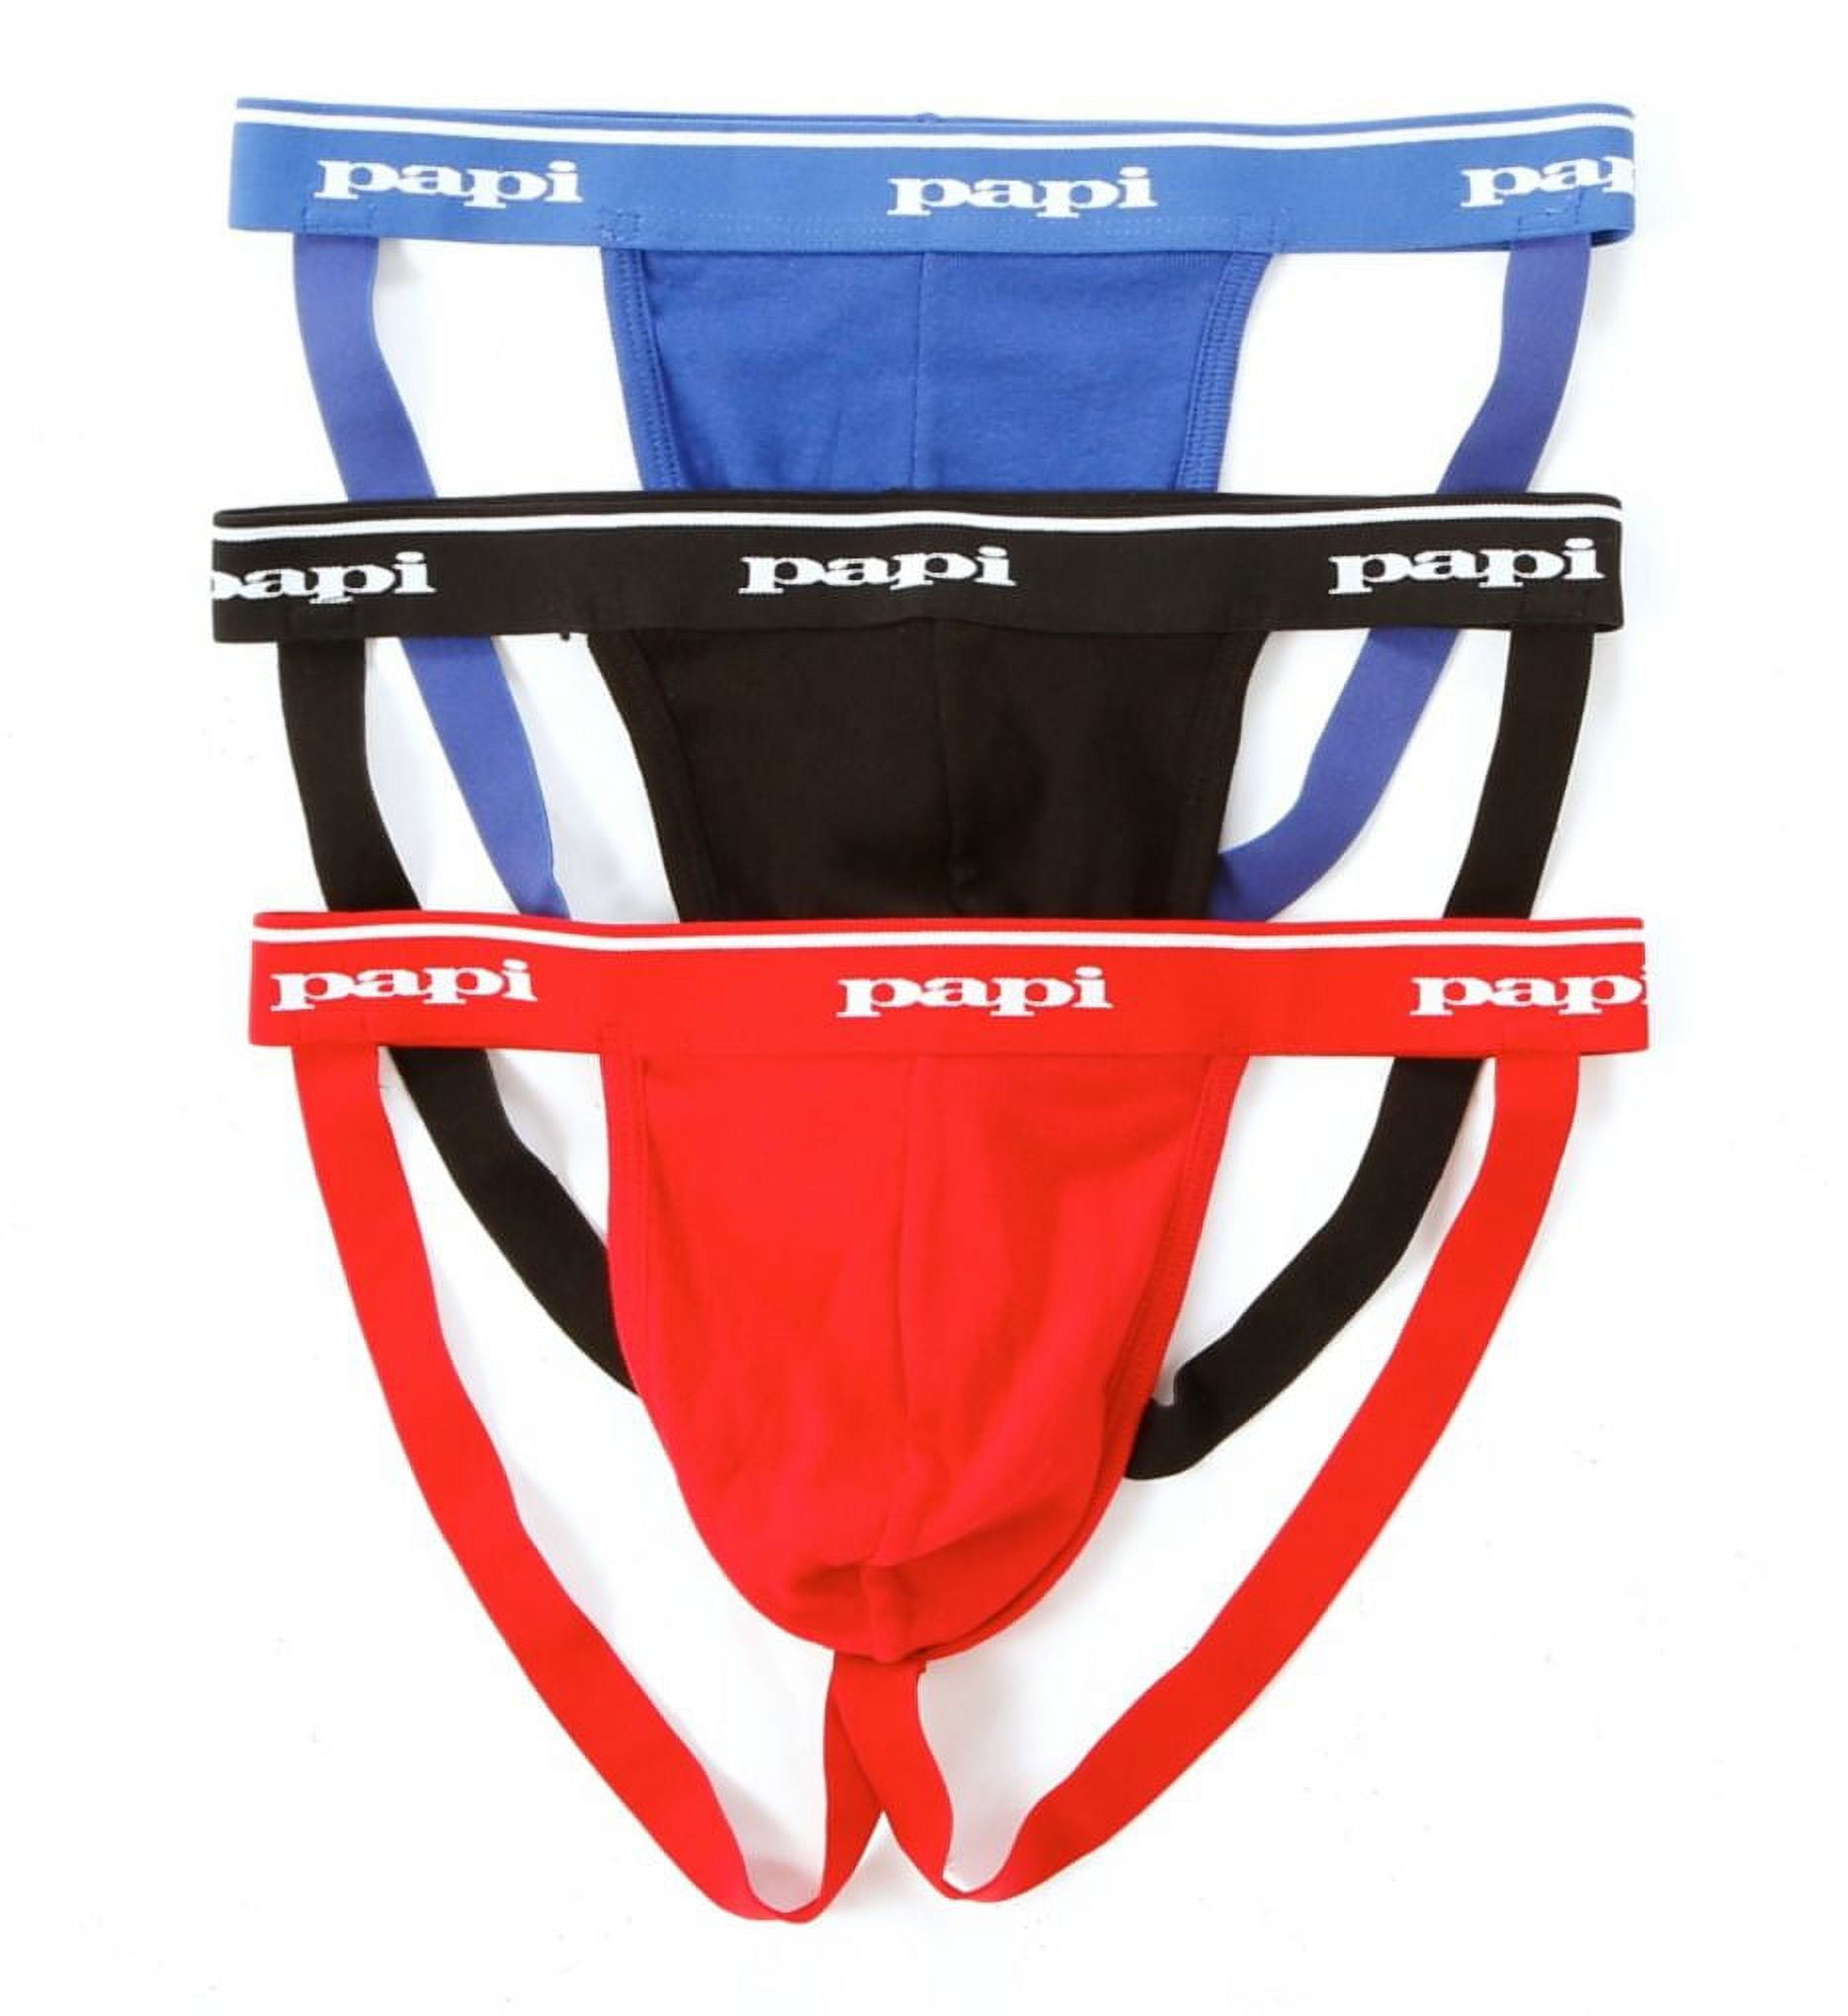  Papi Mens 3-Pack Jockstrap, Athletic Supporter, Breathable  Male Workout Underwear, Black/White/Blue, Large